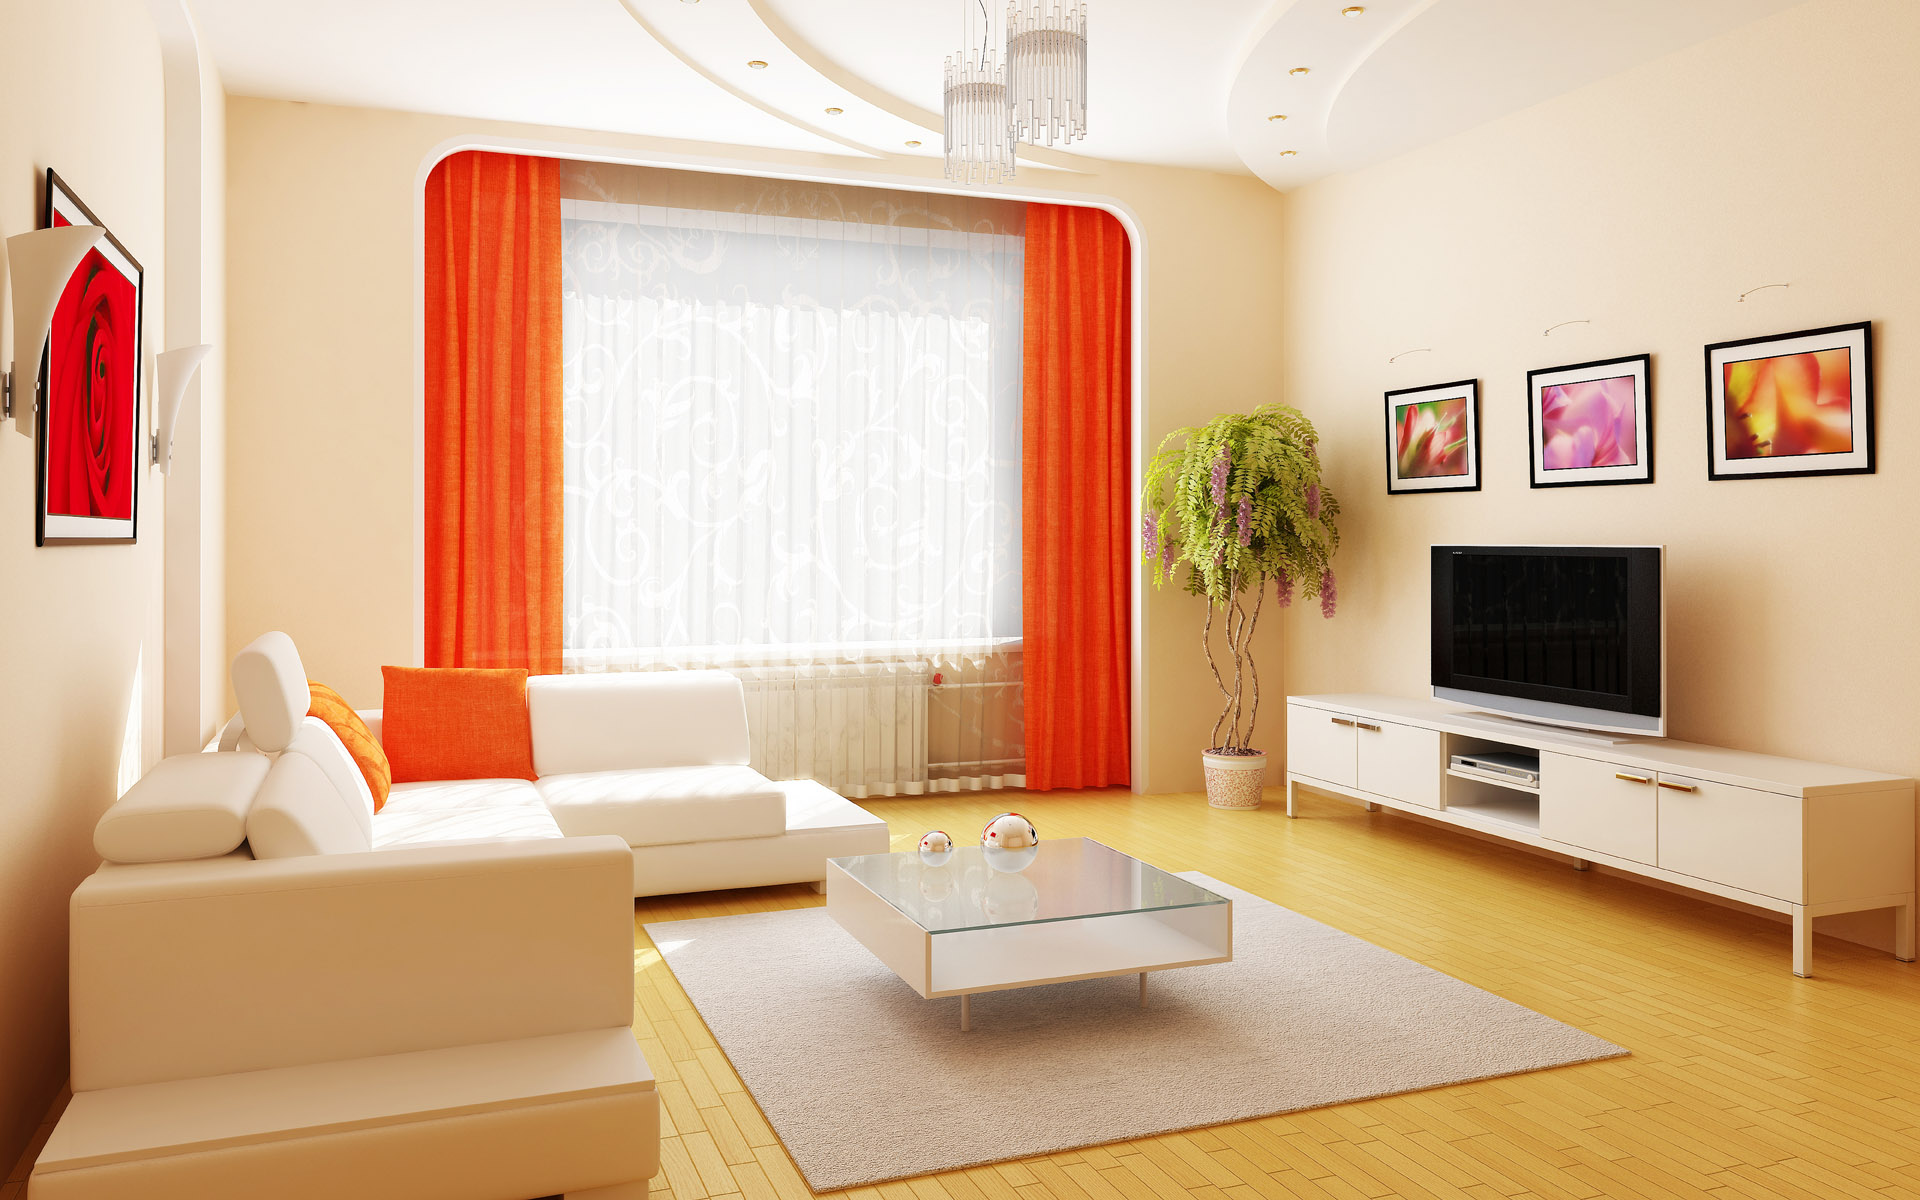 Simple Modern With Mesmerizing Simple Modern Living Room With Orange Curtains Furnished With White Sofa Bed And Glass Table On Thick Rug And Completed With Television On Cupboard Modern Living Room Inspiration For Your Rich Home Decor